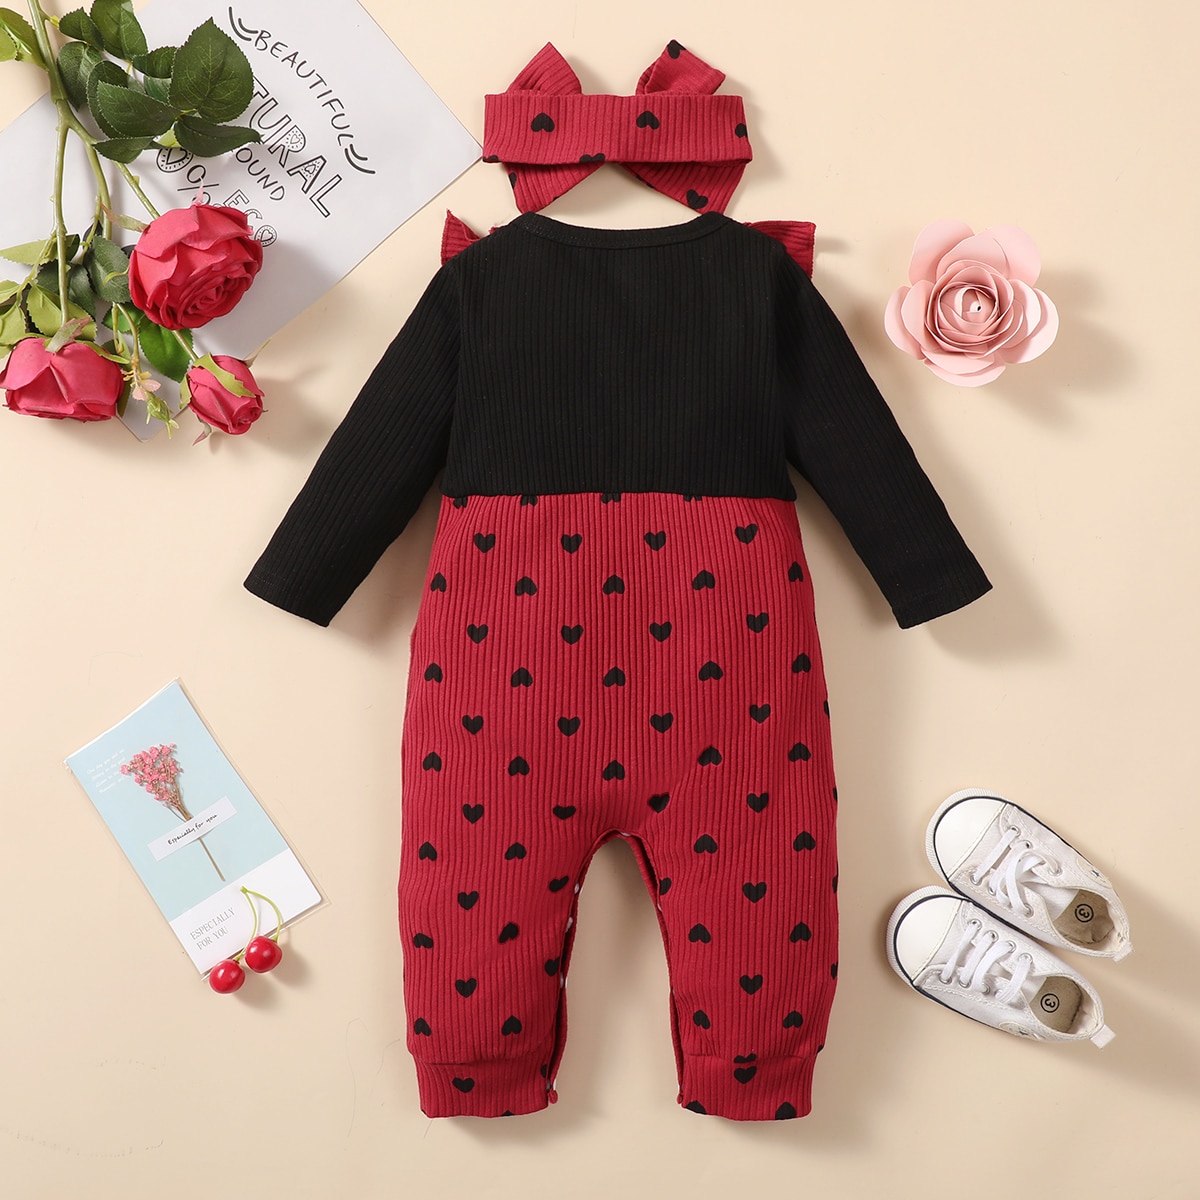 Newborn-Baby-Girls-Romper-Bow-Fashion-Cotton-Long-Sleeve-Infant-Love-Printed-Patchwork-Jumpsuit-Overalls-0-1